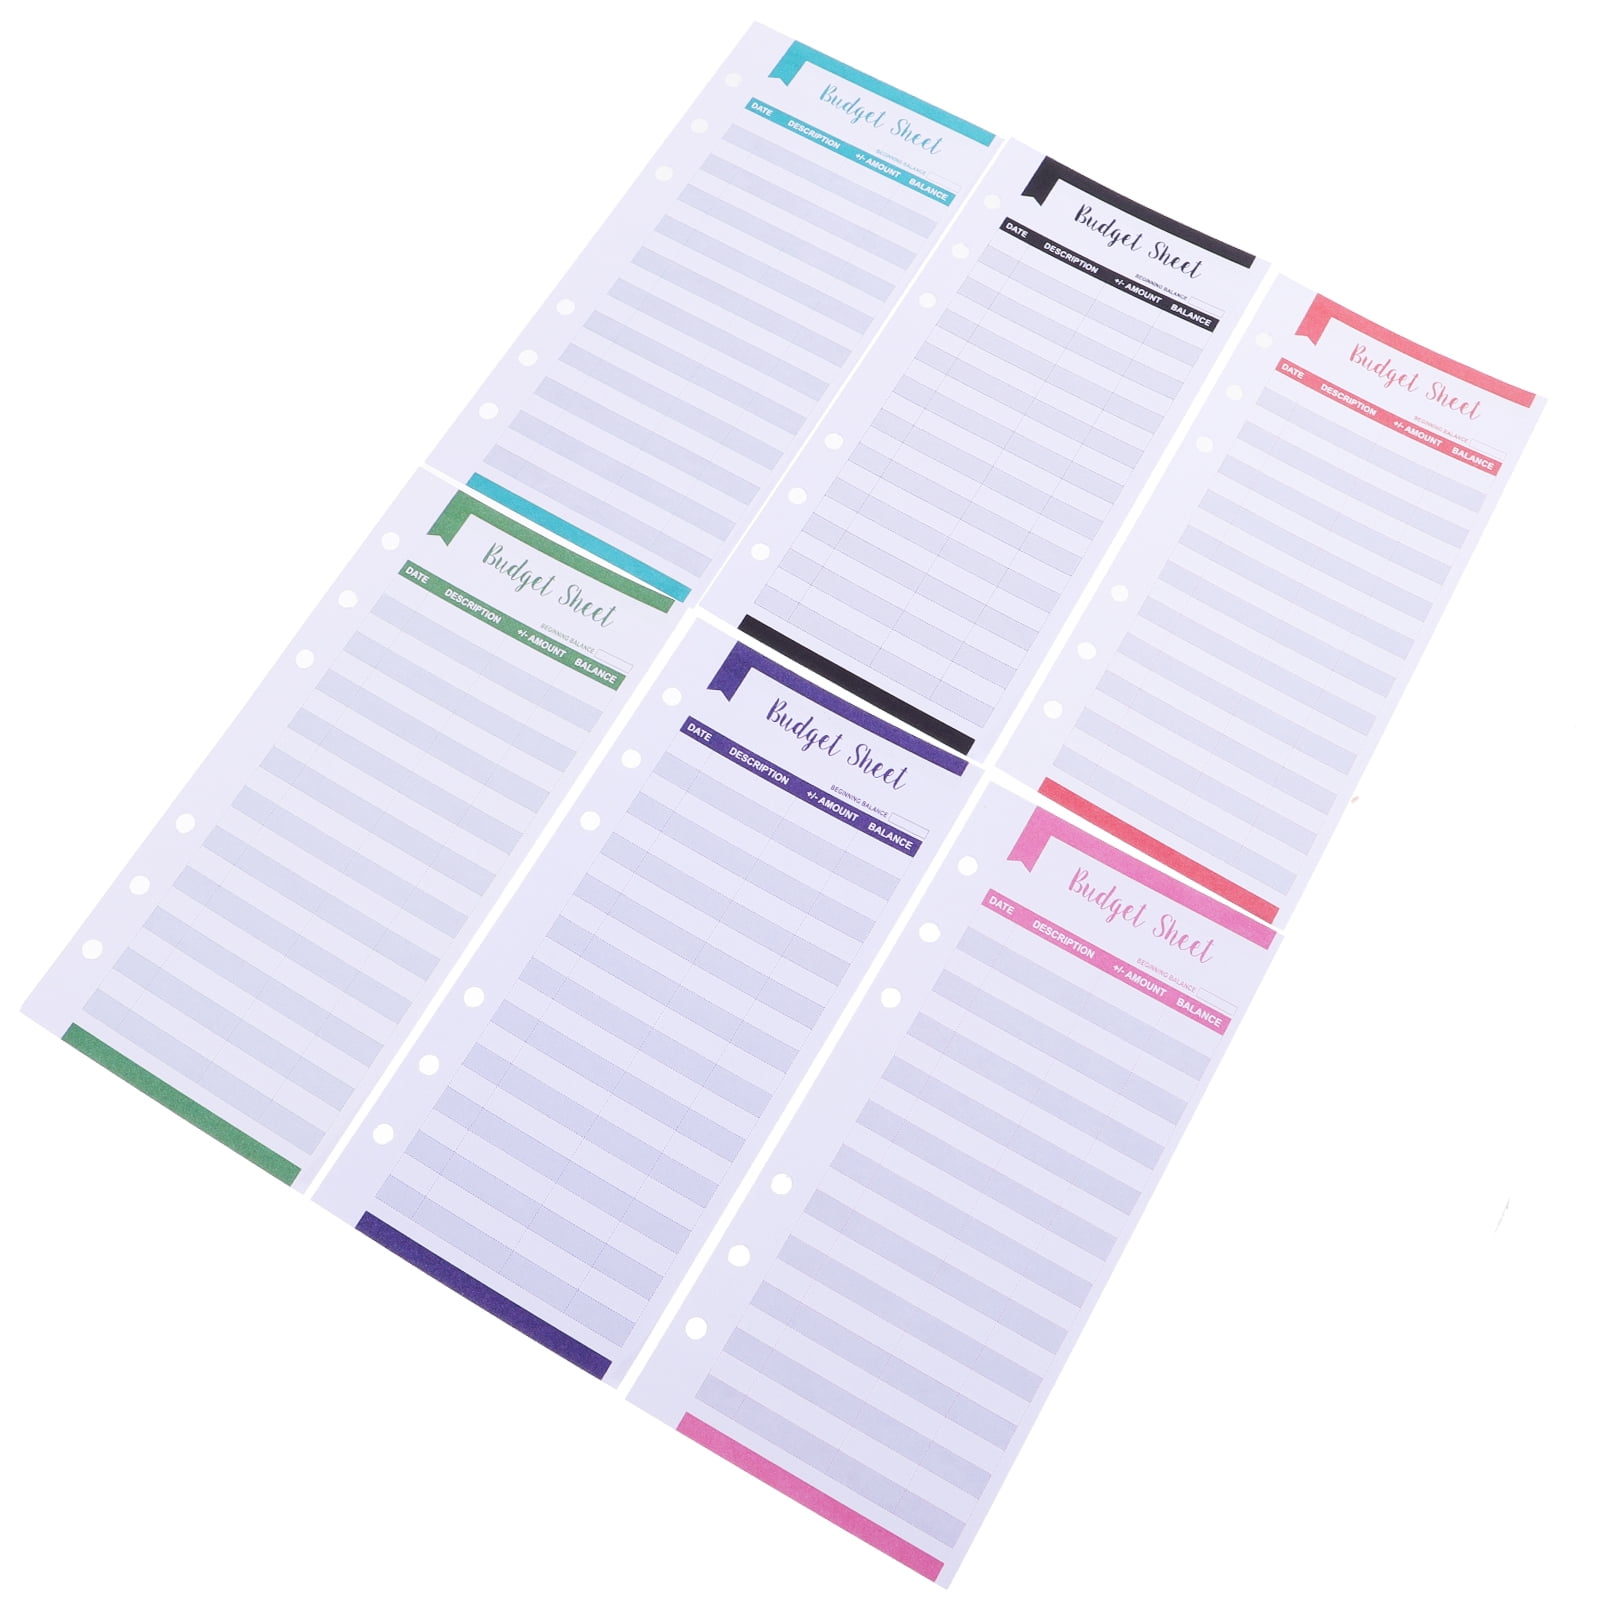  PATIKIL A6 Budget Sheets, 12 Pack 6-Hole Expense Tracker Money  Tracking Sheet for Budgeting Cash Envelope Planner Wallet, Assorted Colors  : Office Products